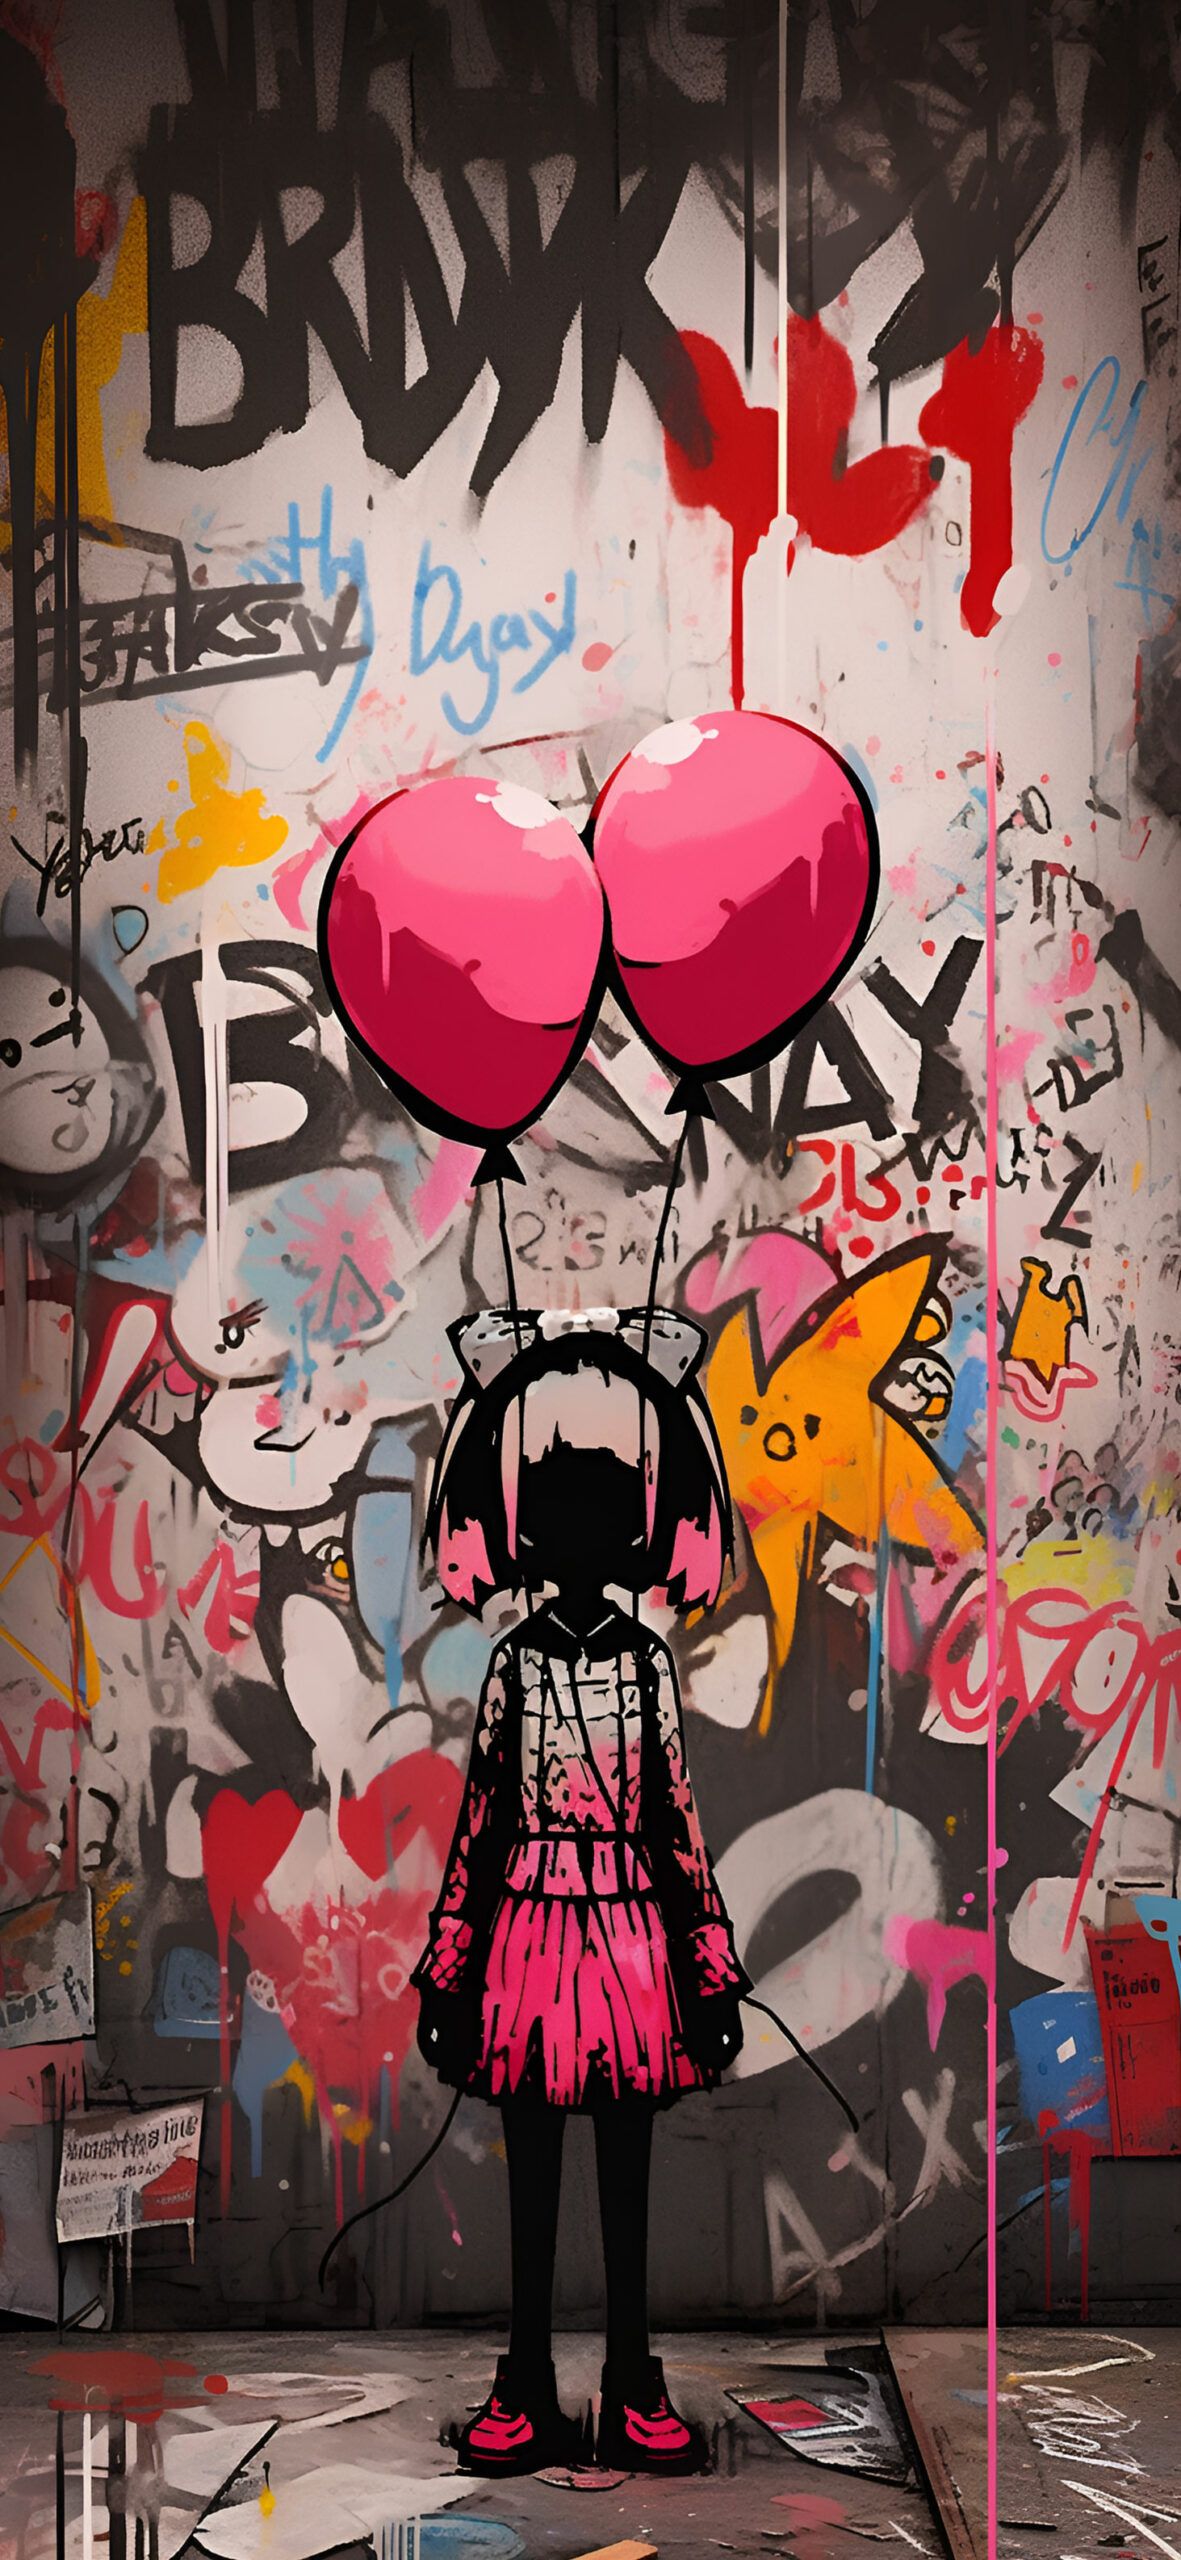 IPhone wallpaper of a girl holding balloons in front of a graffiti wall - Graffiti